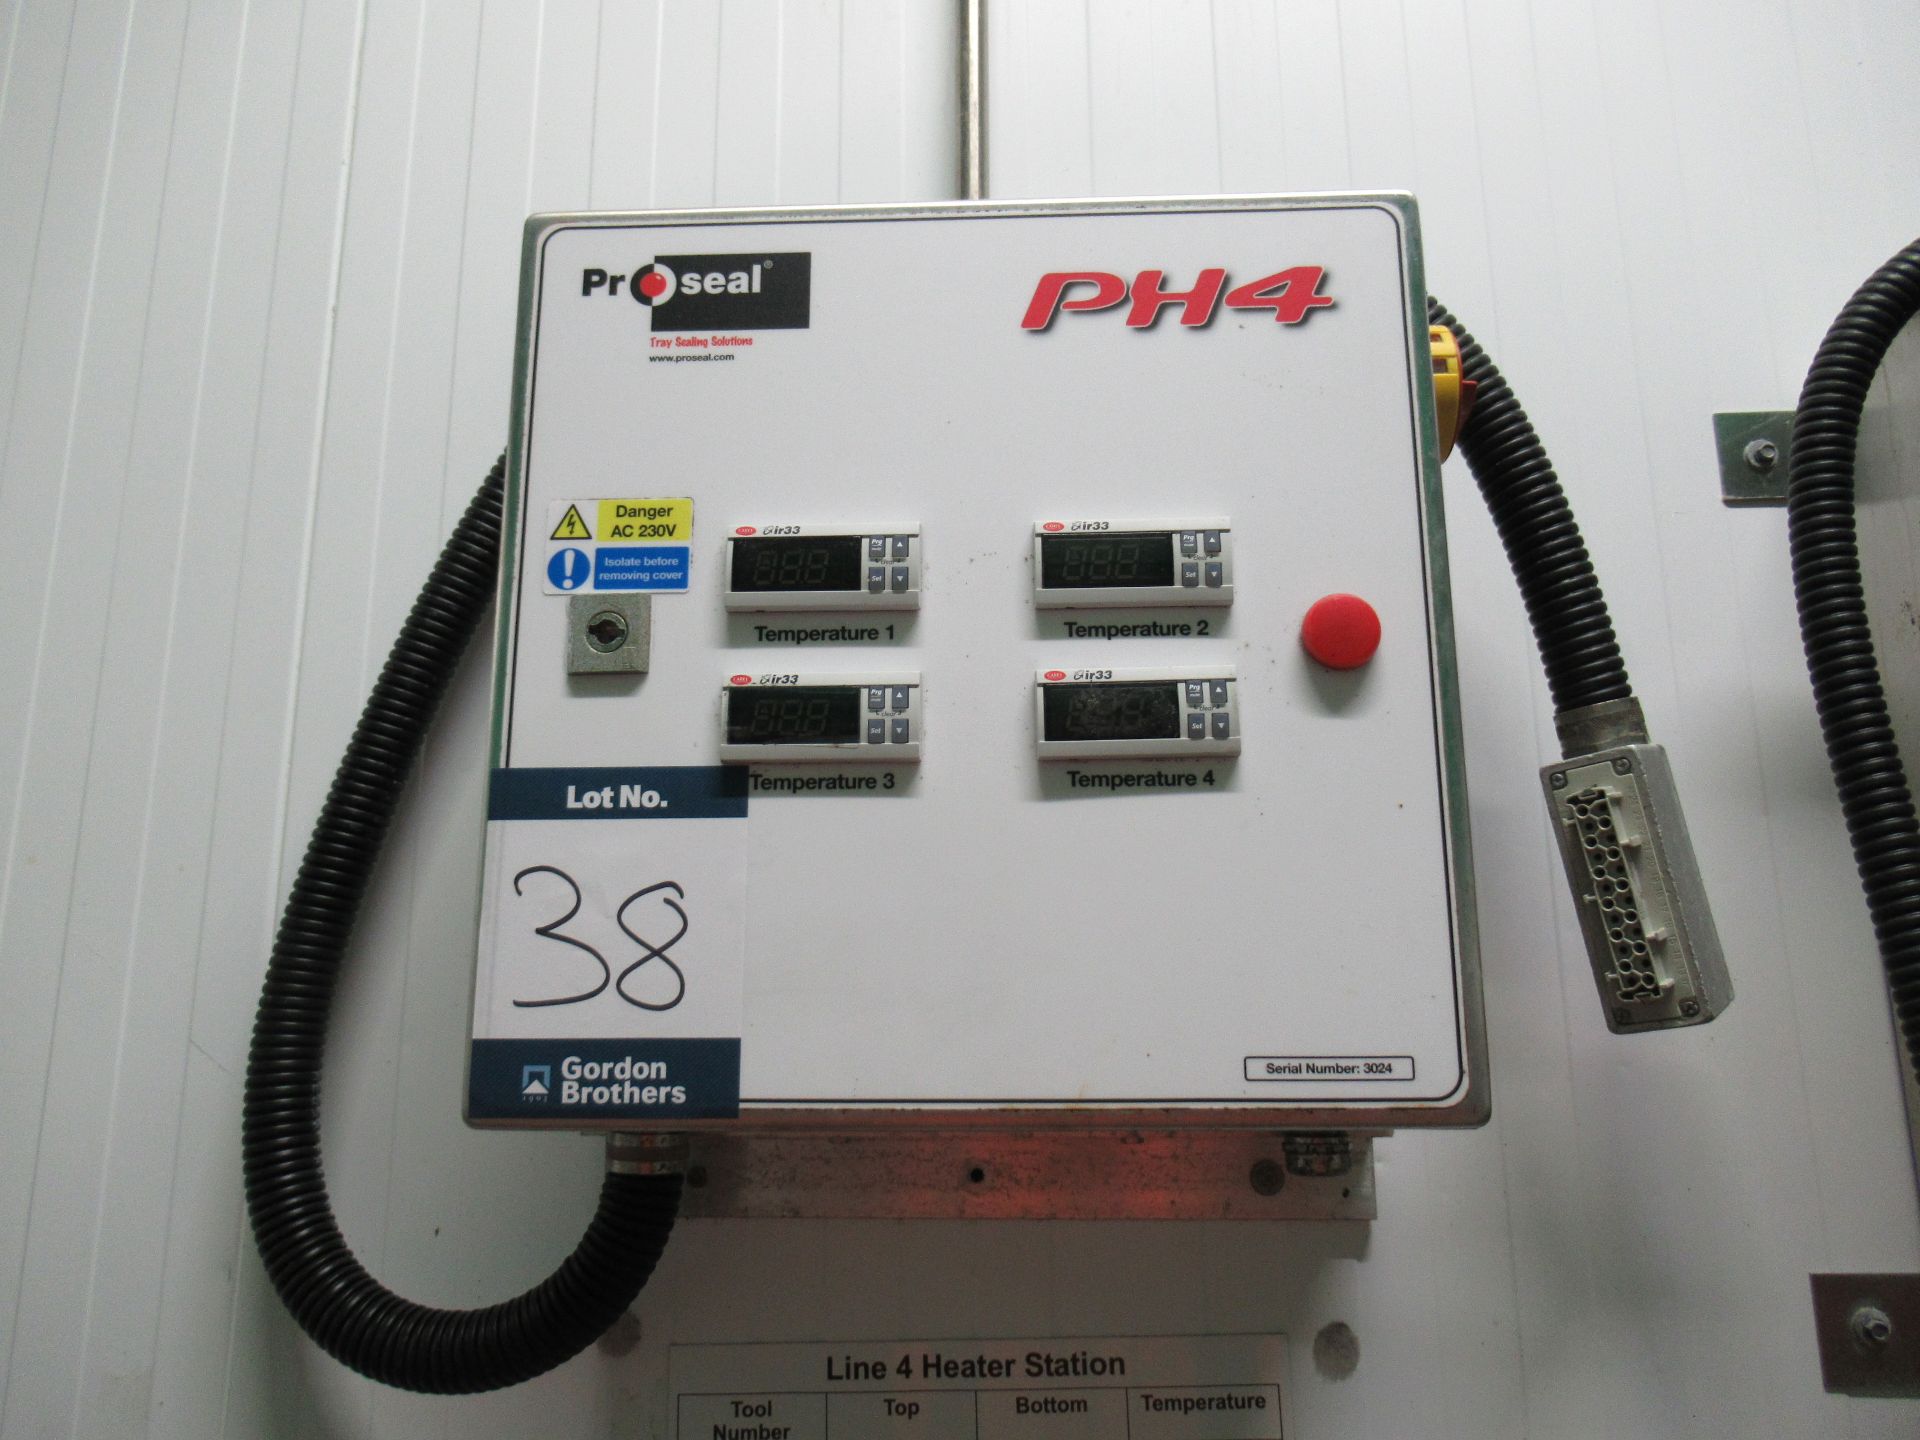 Proseal PH4 tool pre-heater panel. Serial no: 3024 wall mounted